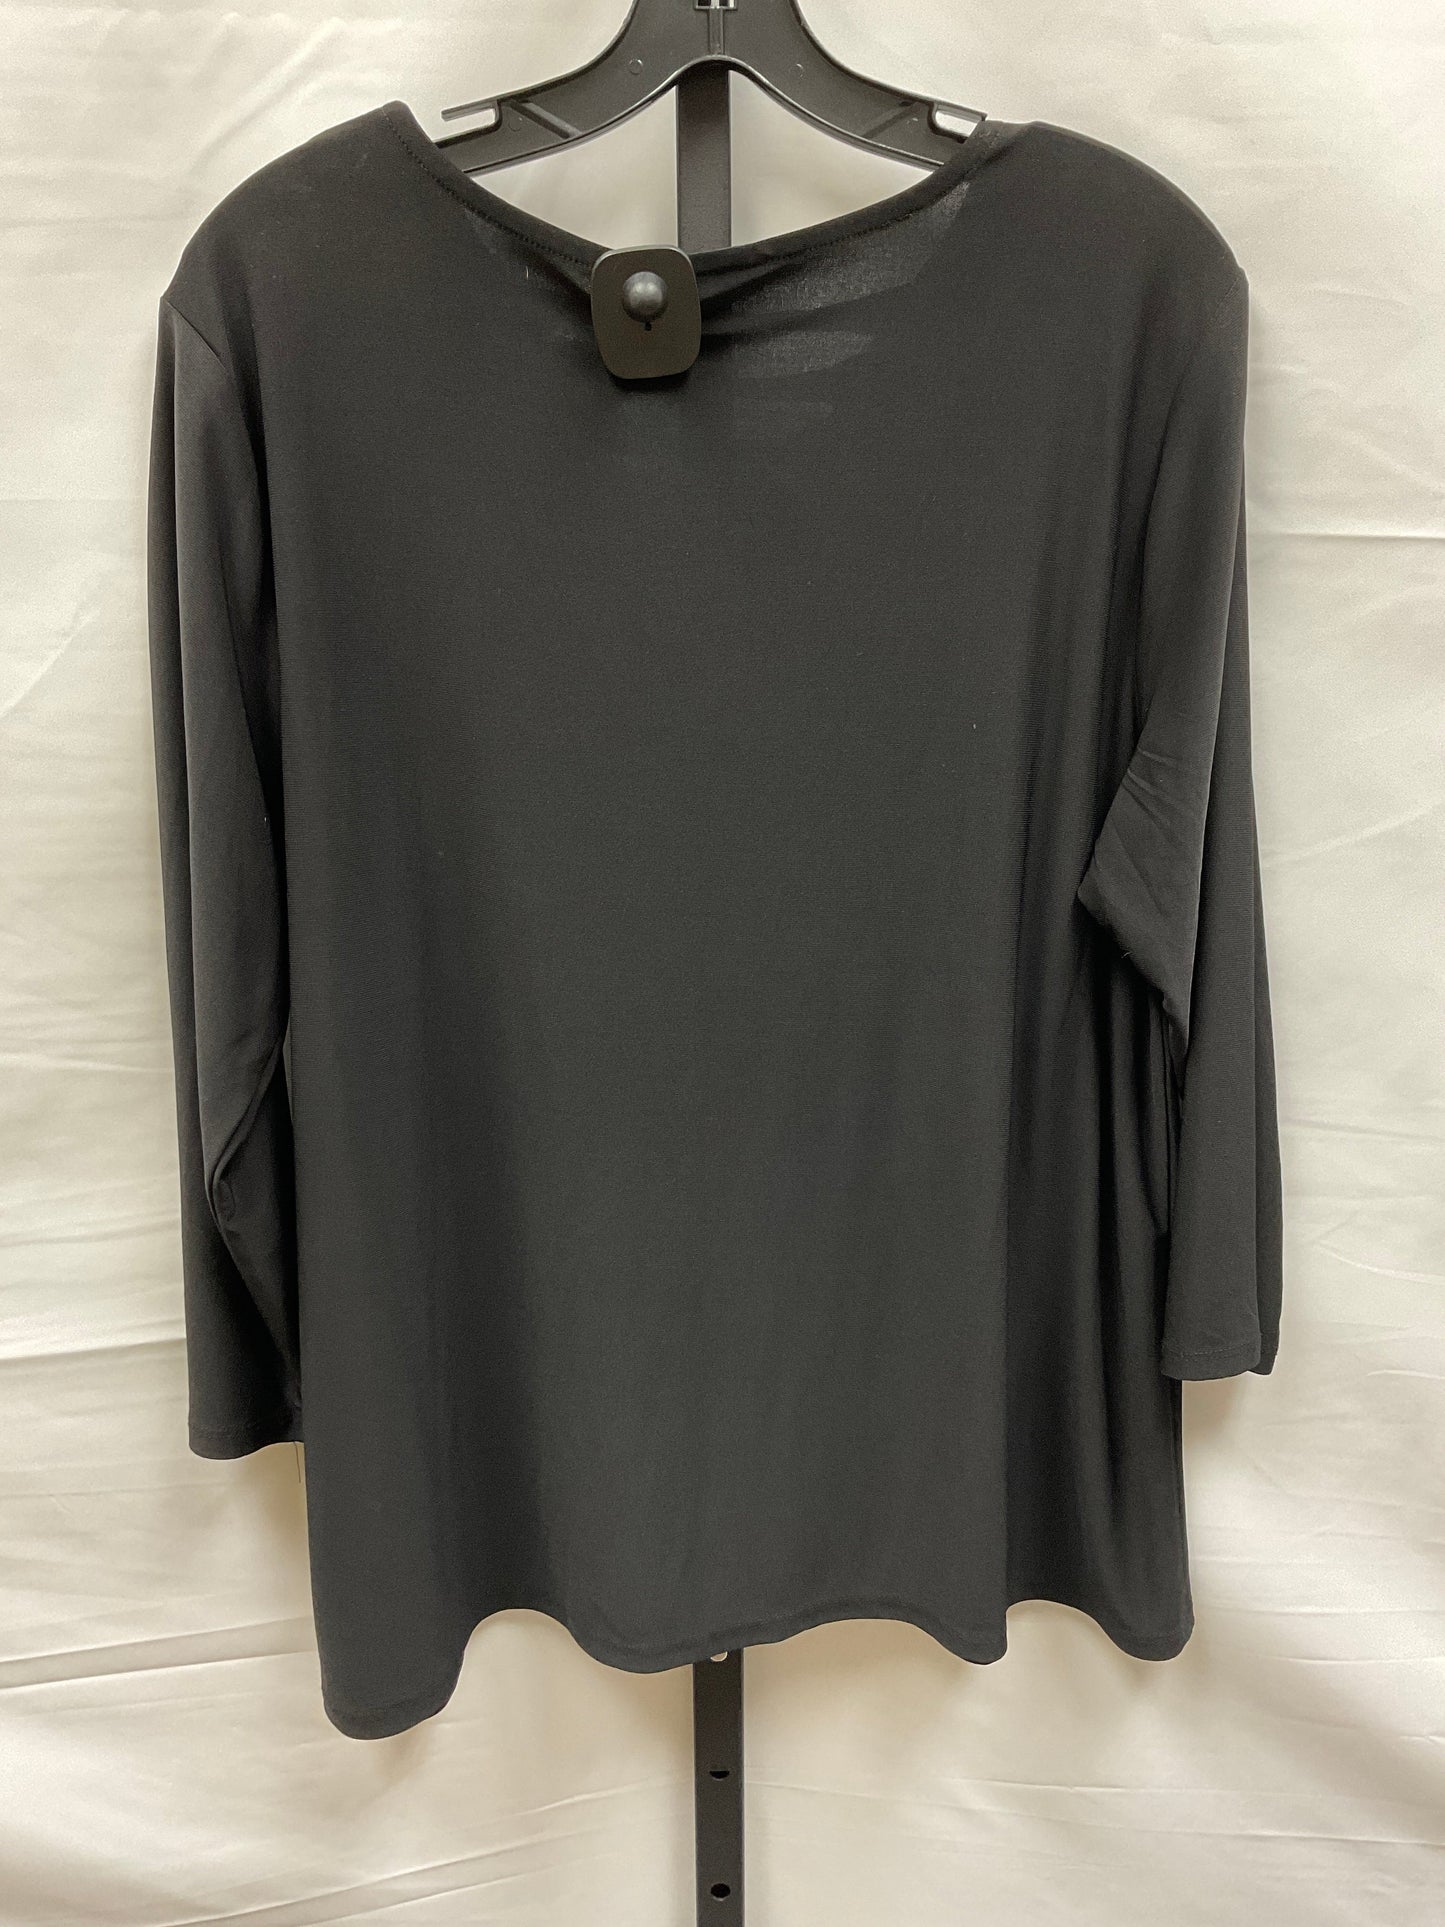 Black Top 3/4 Sleeve Cato, Size L